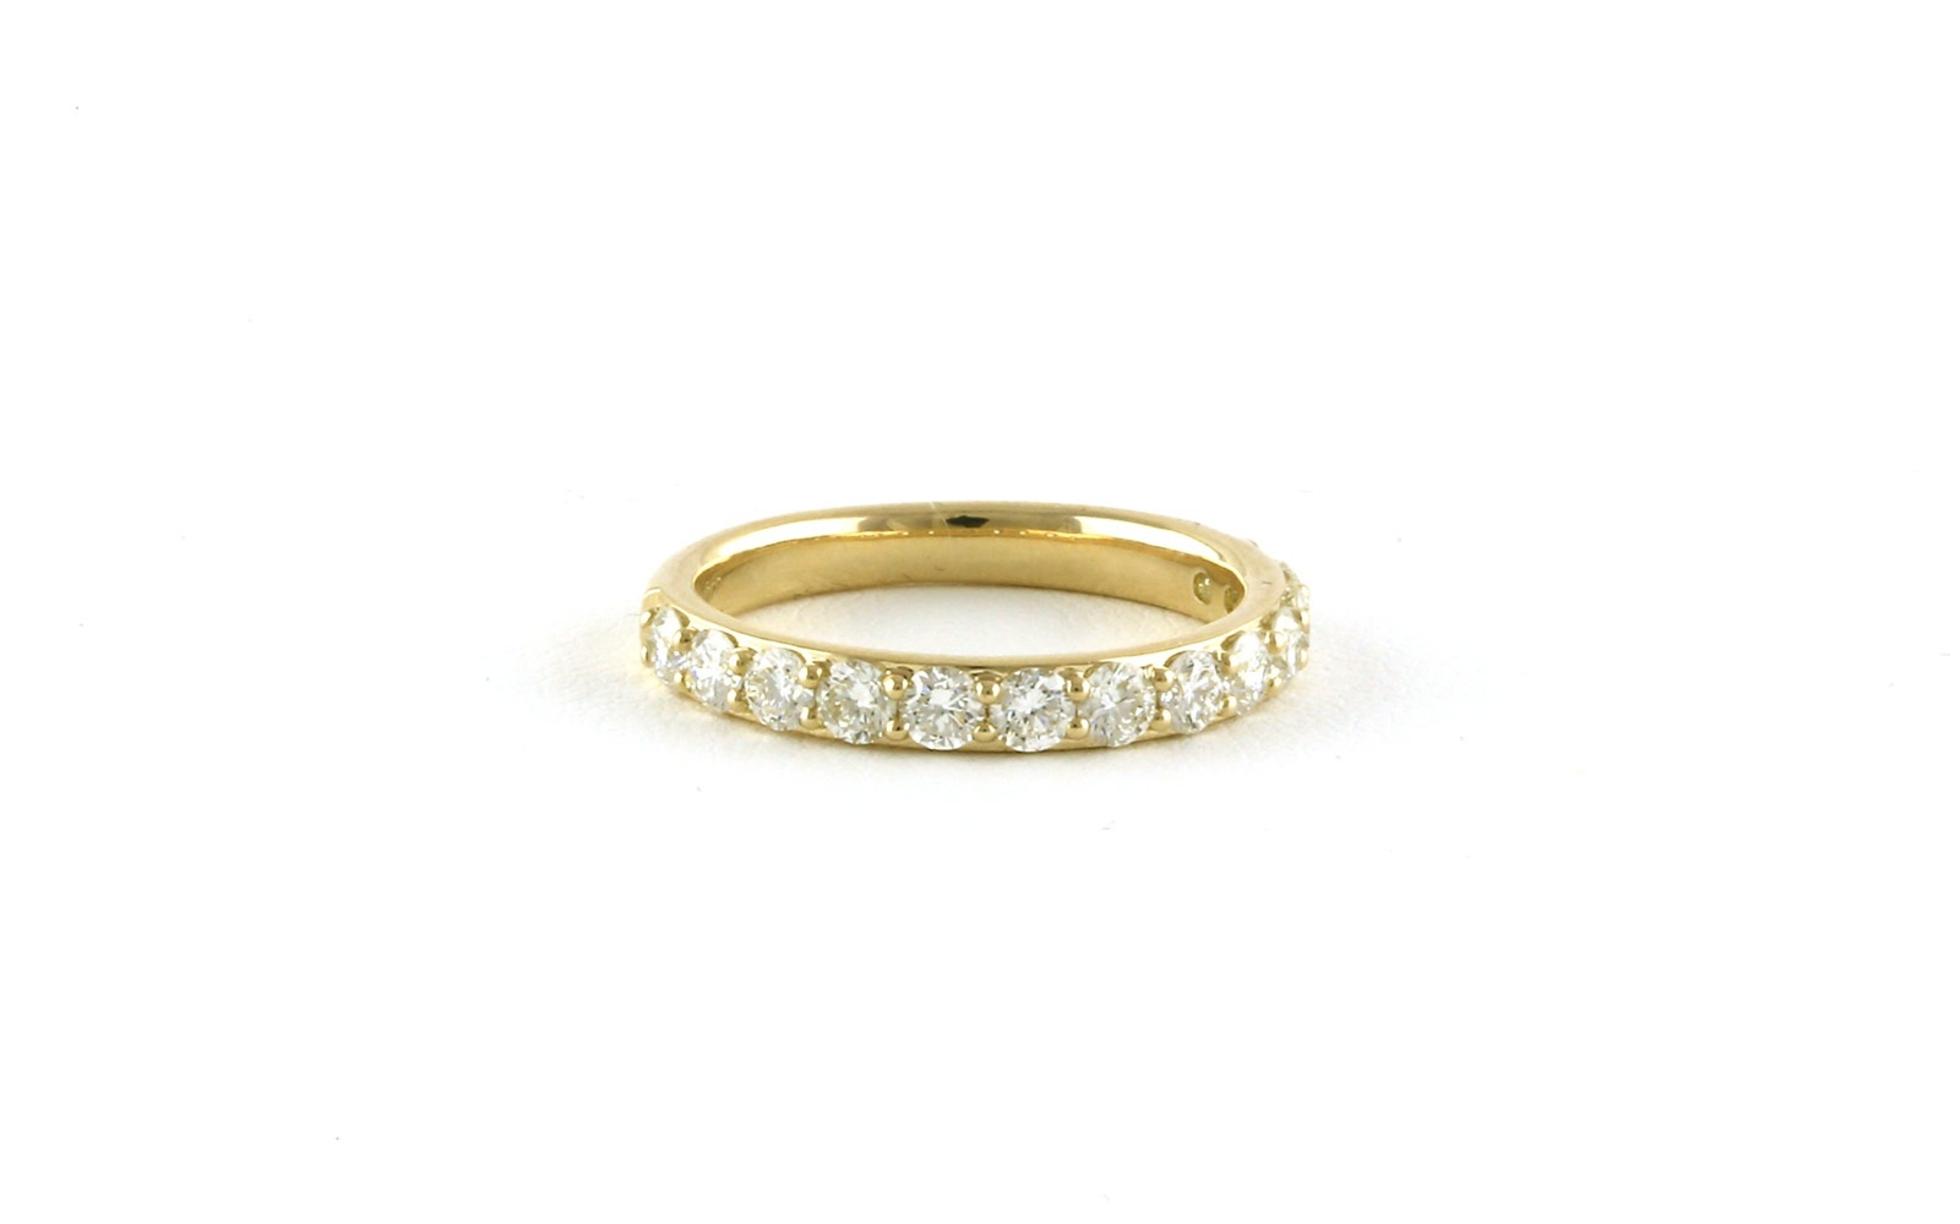 13-Stone Shared Prong Diamond Wedding Band in Yellow Gold (1.00cts TWT)